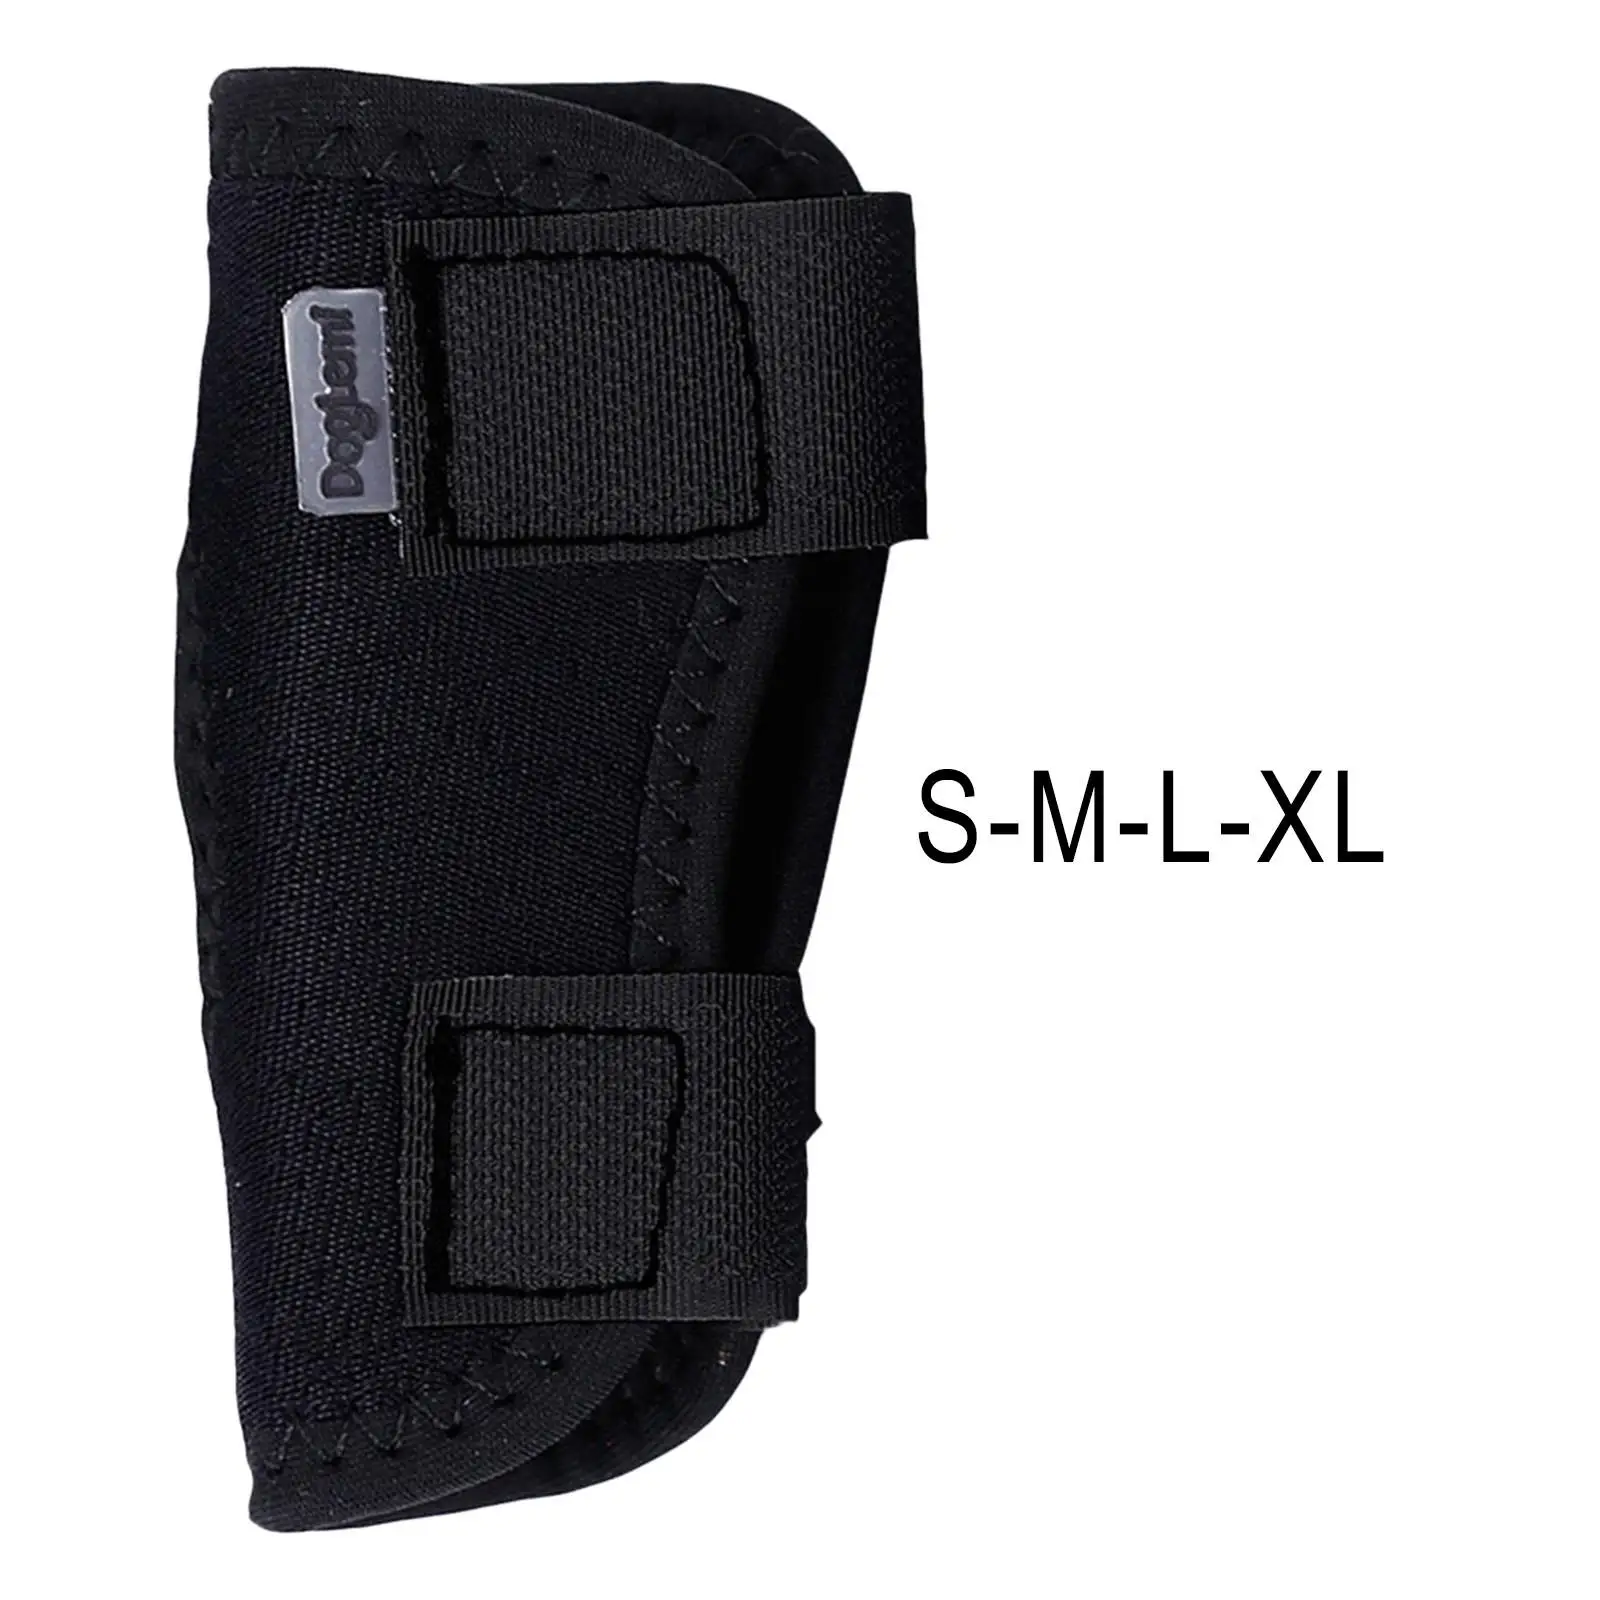 Adjustable Dog Leg Knee  Auxiliary Strap Knee Pads for Wounds Compression Injuries  Anti-Licking Lower Leg Ankle 